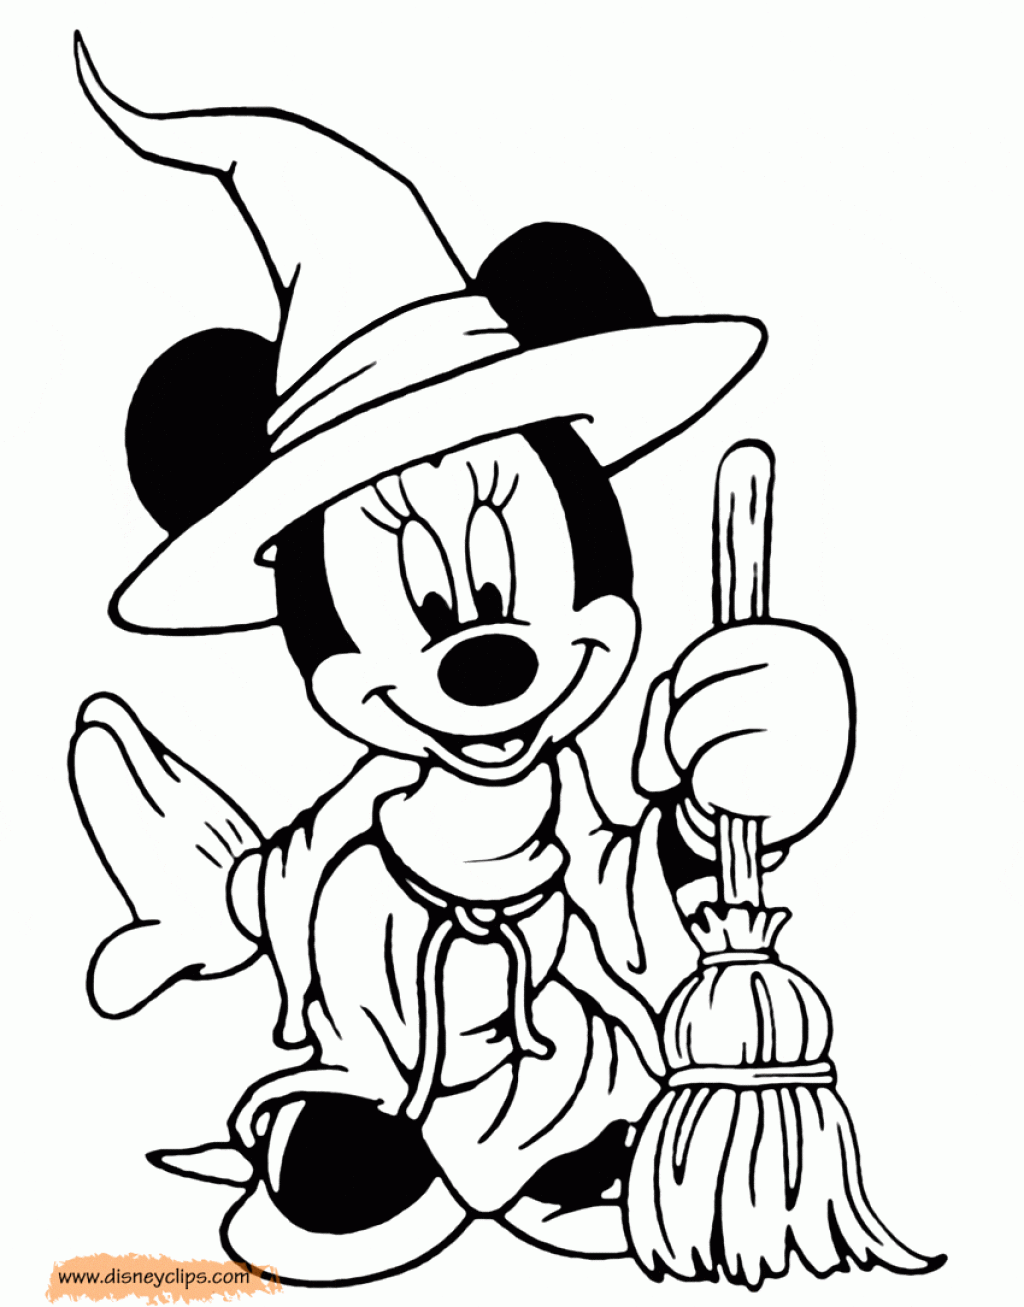 Picture of: Disney Halloween Coloring Pages  Halloween Fun at Disney’s World